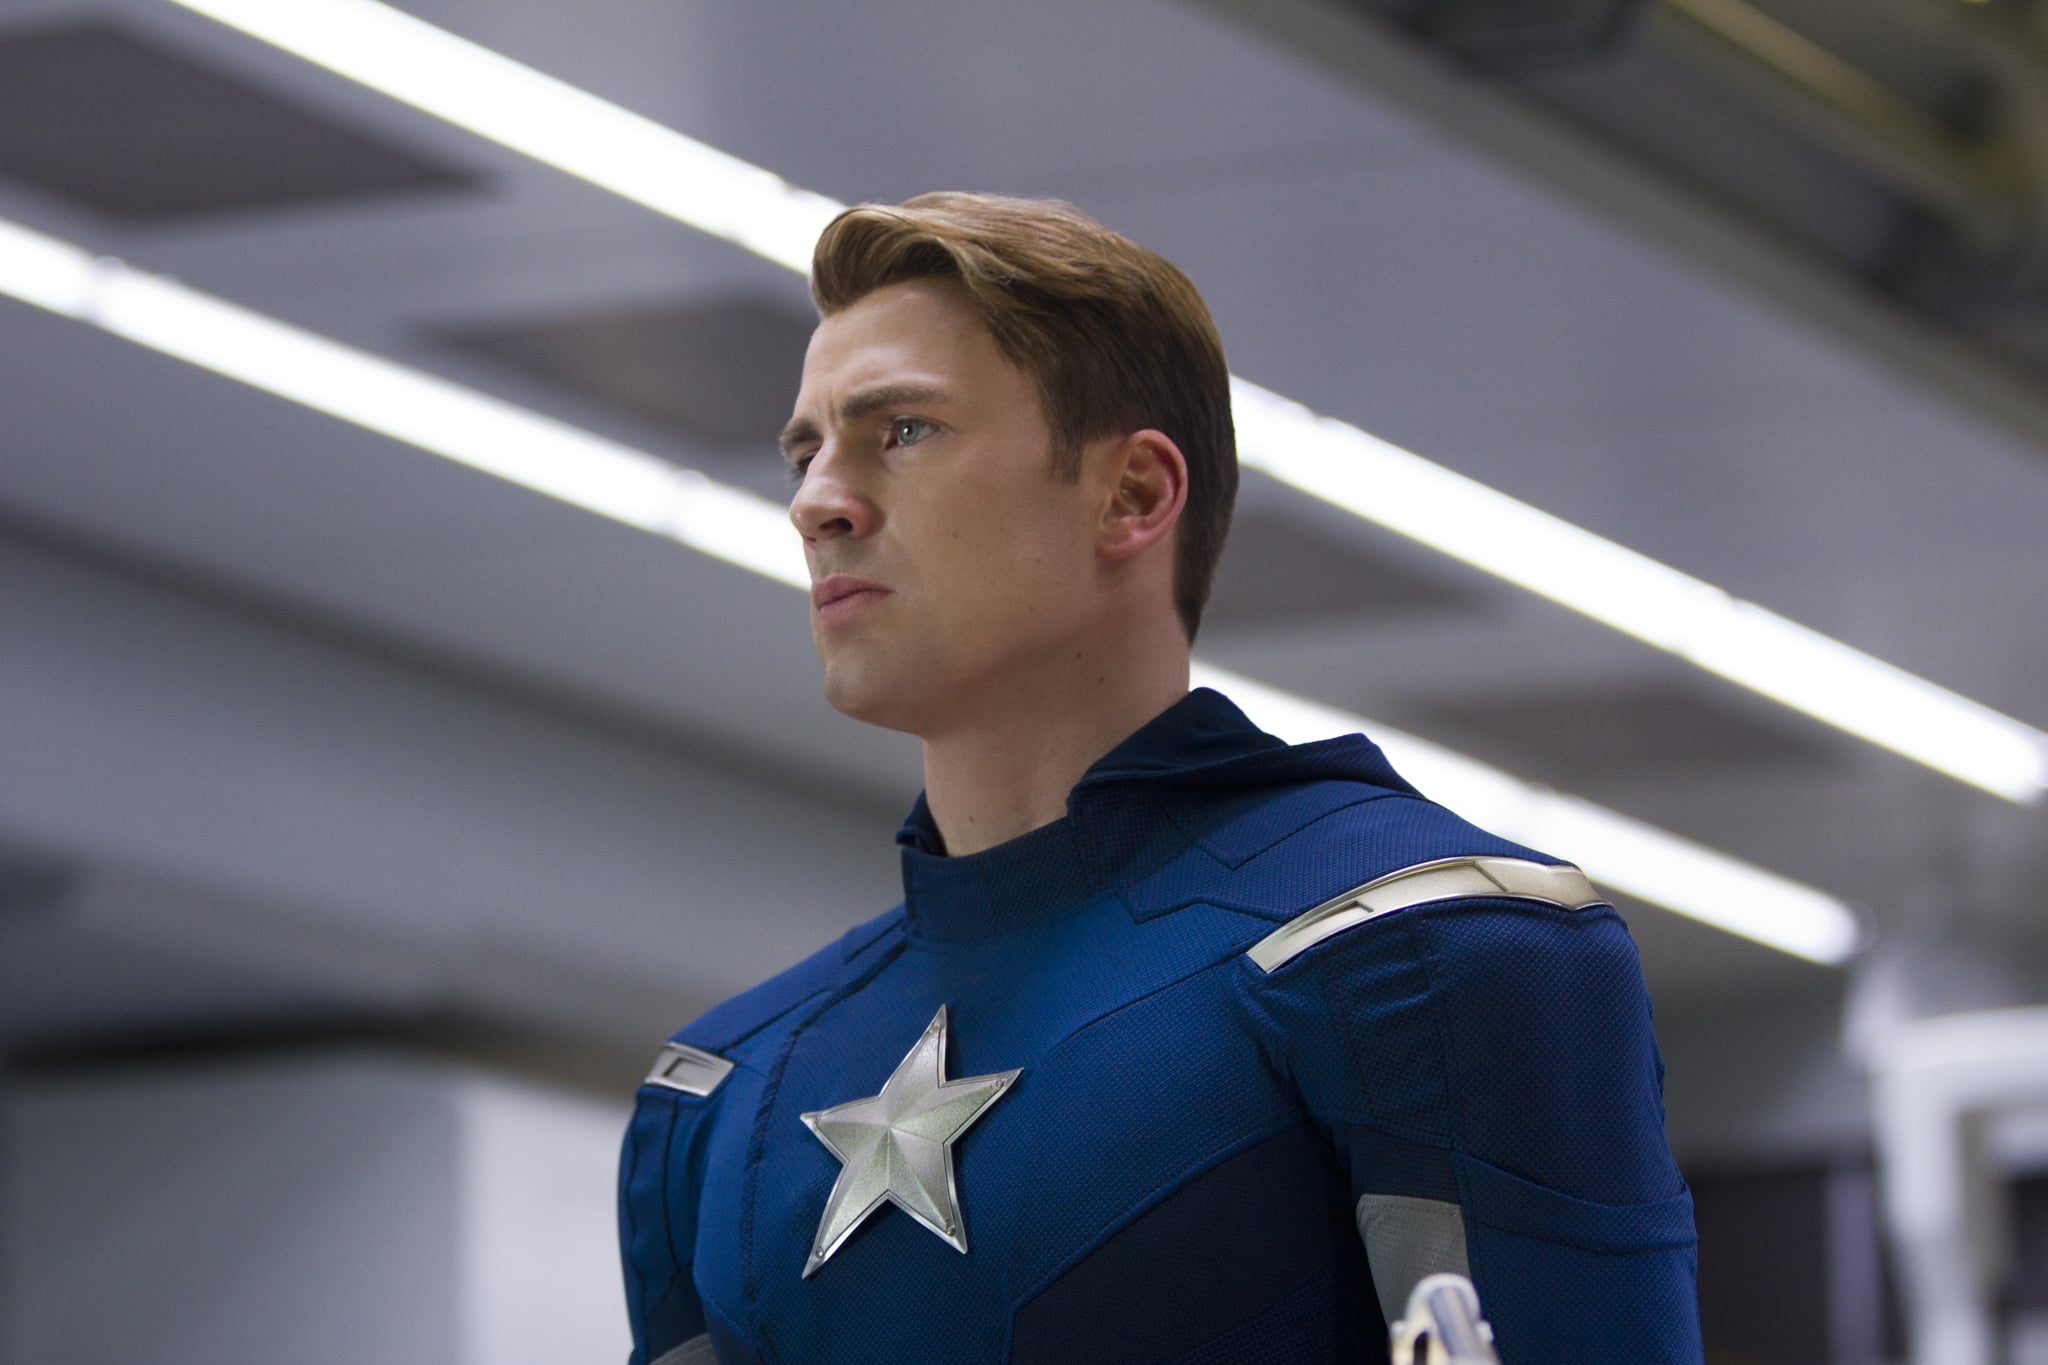 Chris Evans As Captain America In The Avengers See All